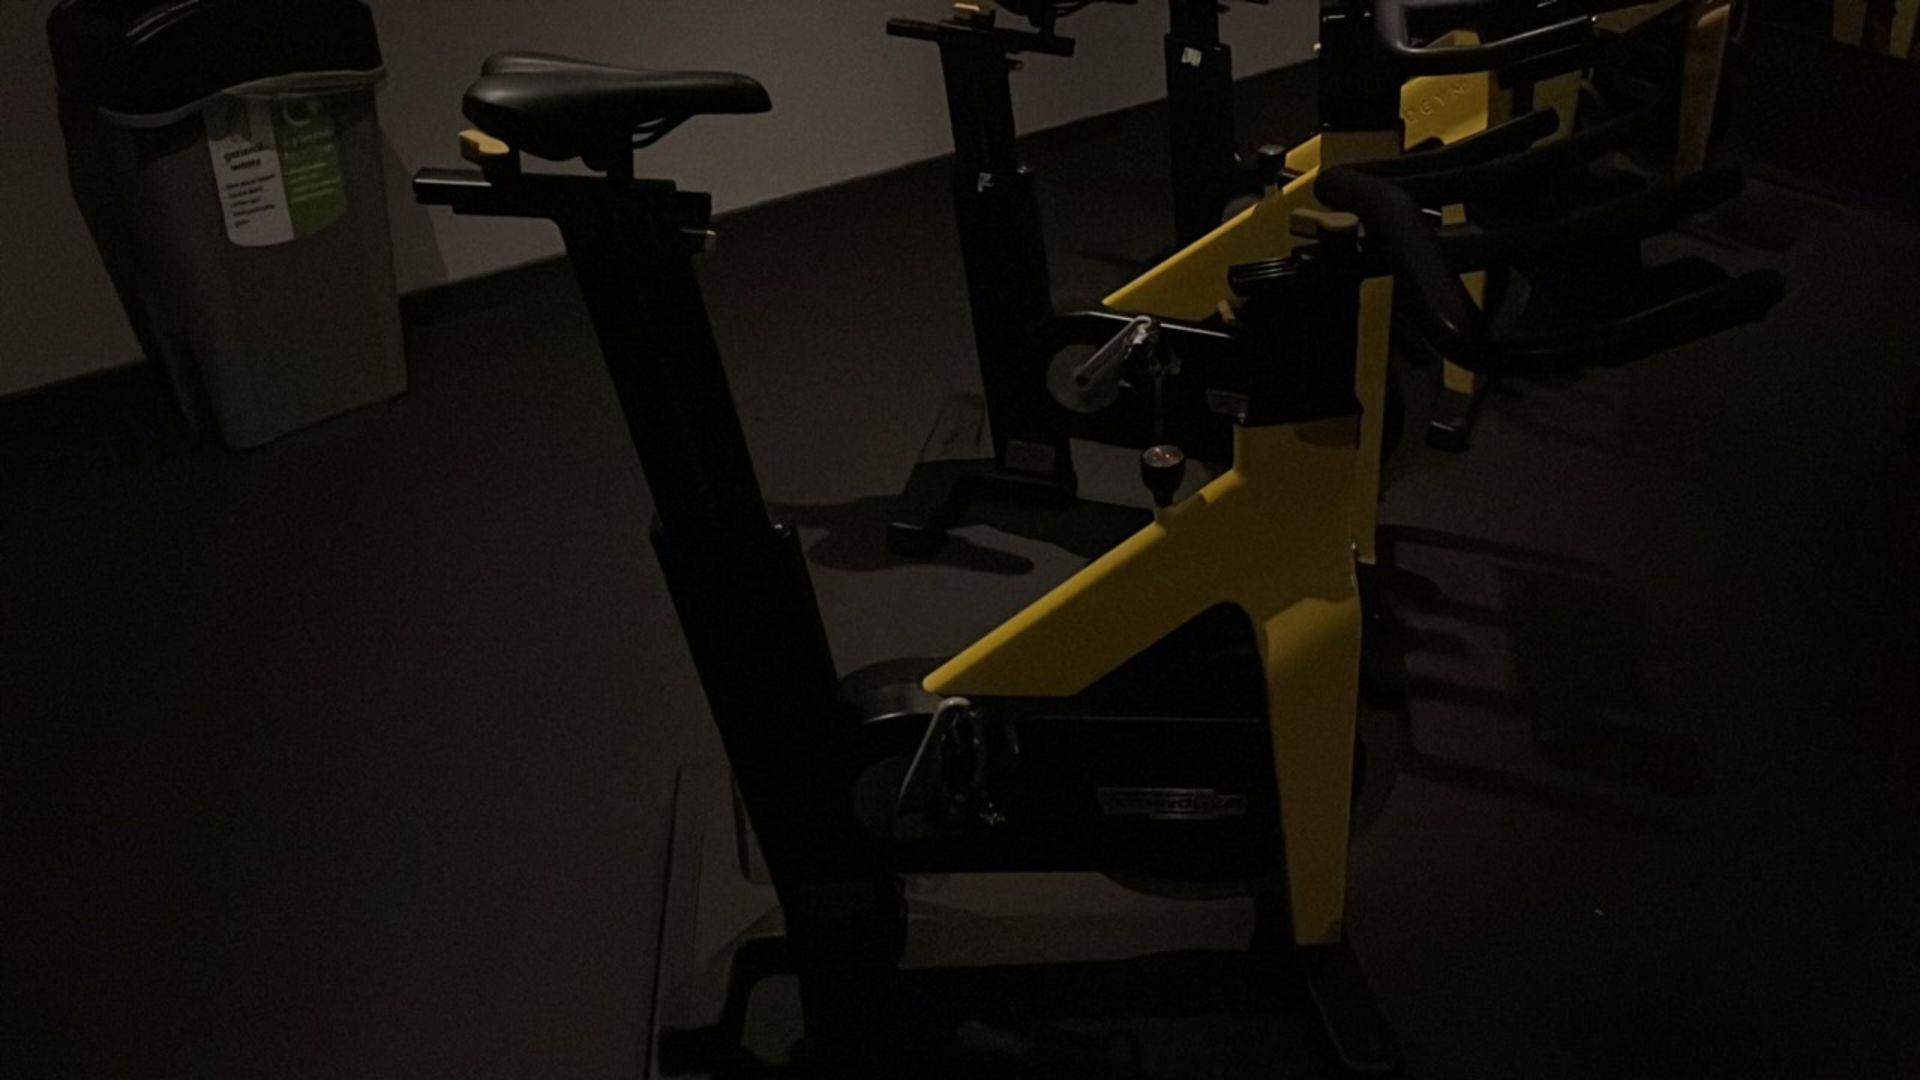 Technogym Group Cycle Ride Spin Bike - Image 4 of 9